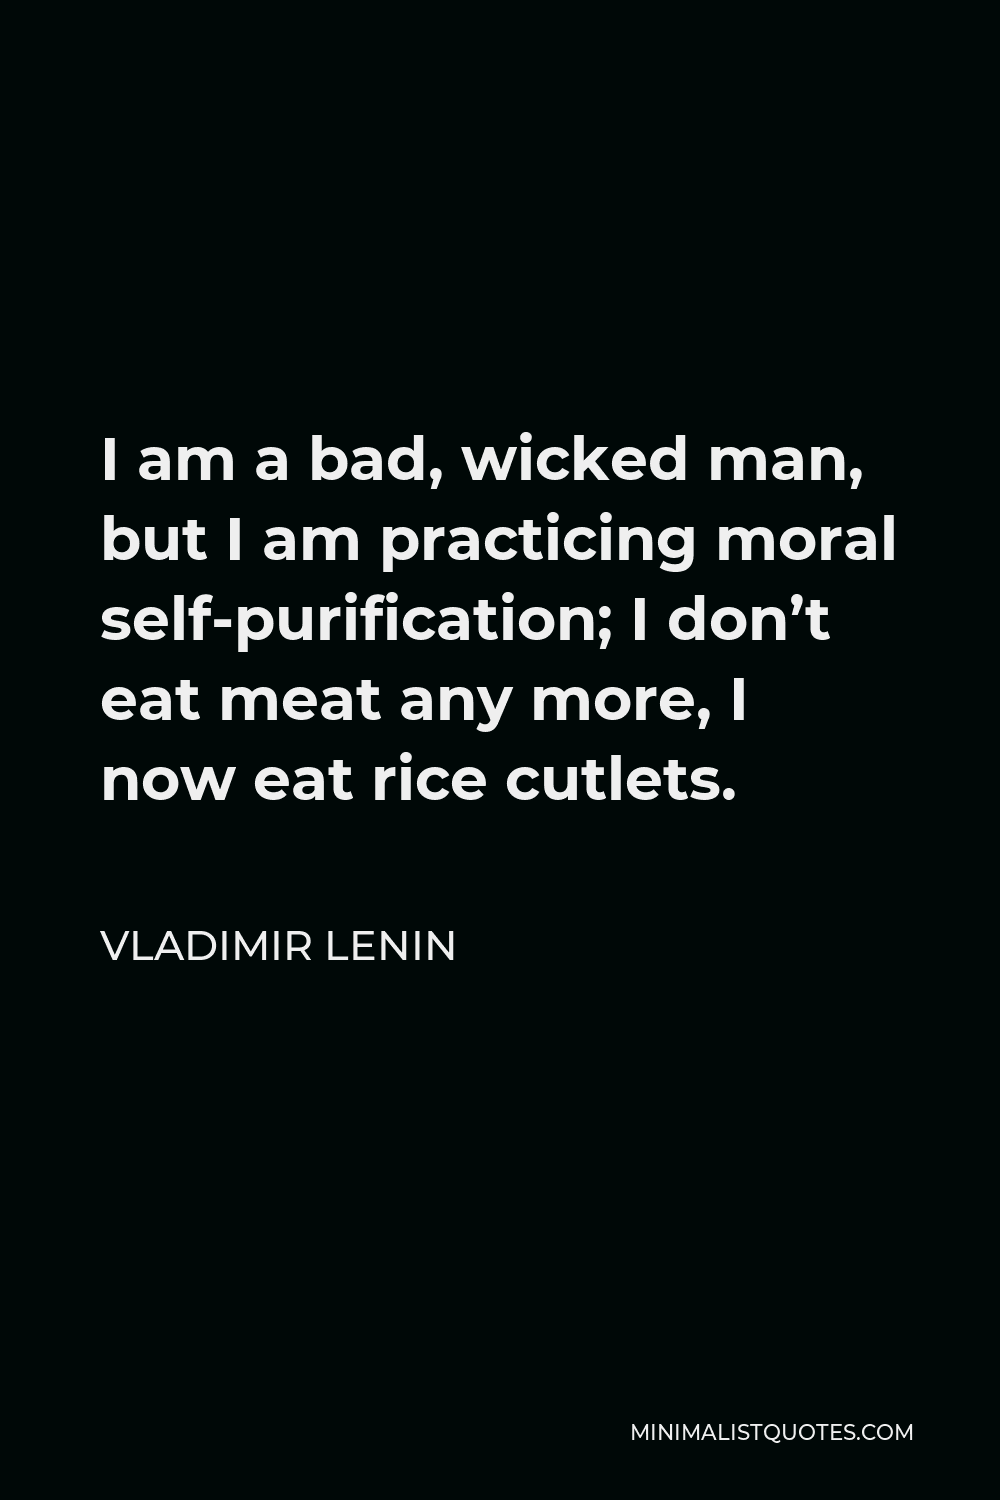 Vladimir Lenin Quote - I am a bad, wicked man, but I am practicing moral self-purification; I don’t eat meat any more, I now eat rice cutlets.